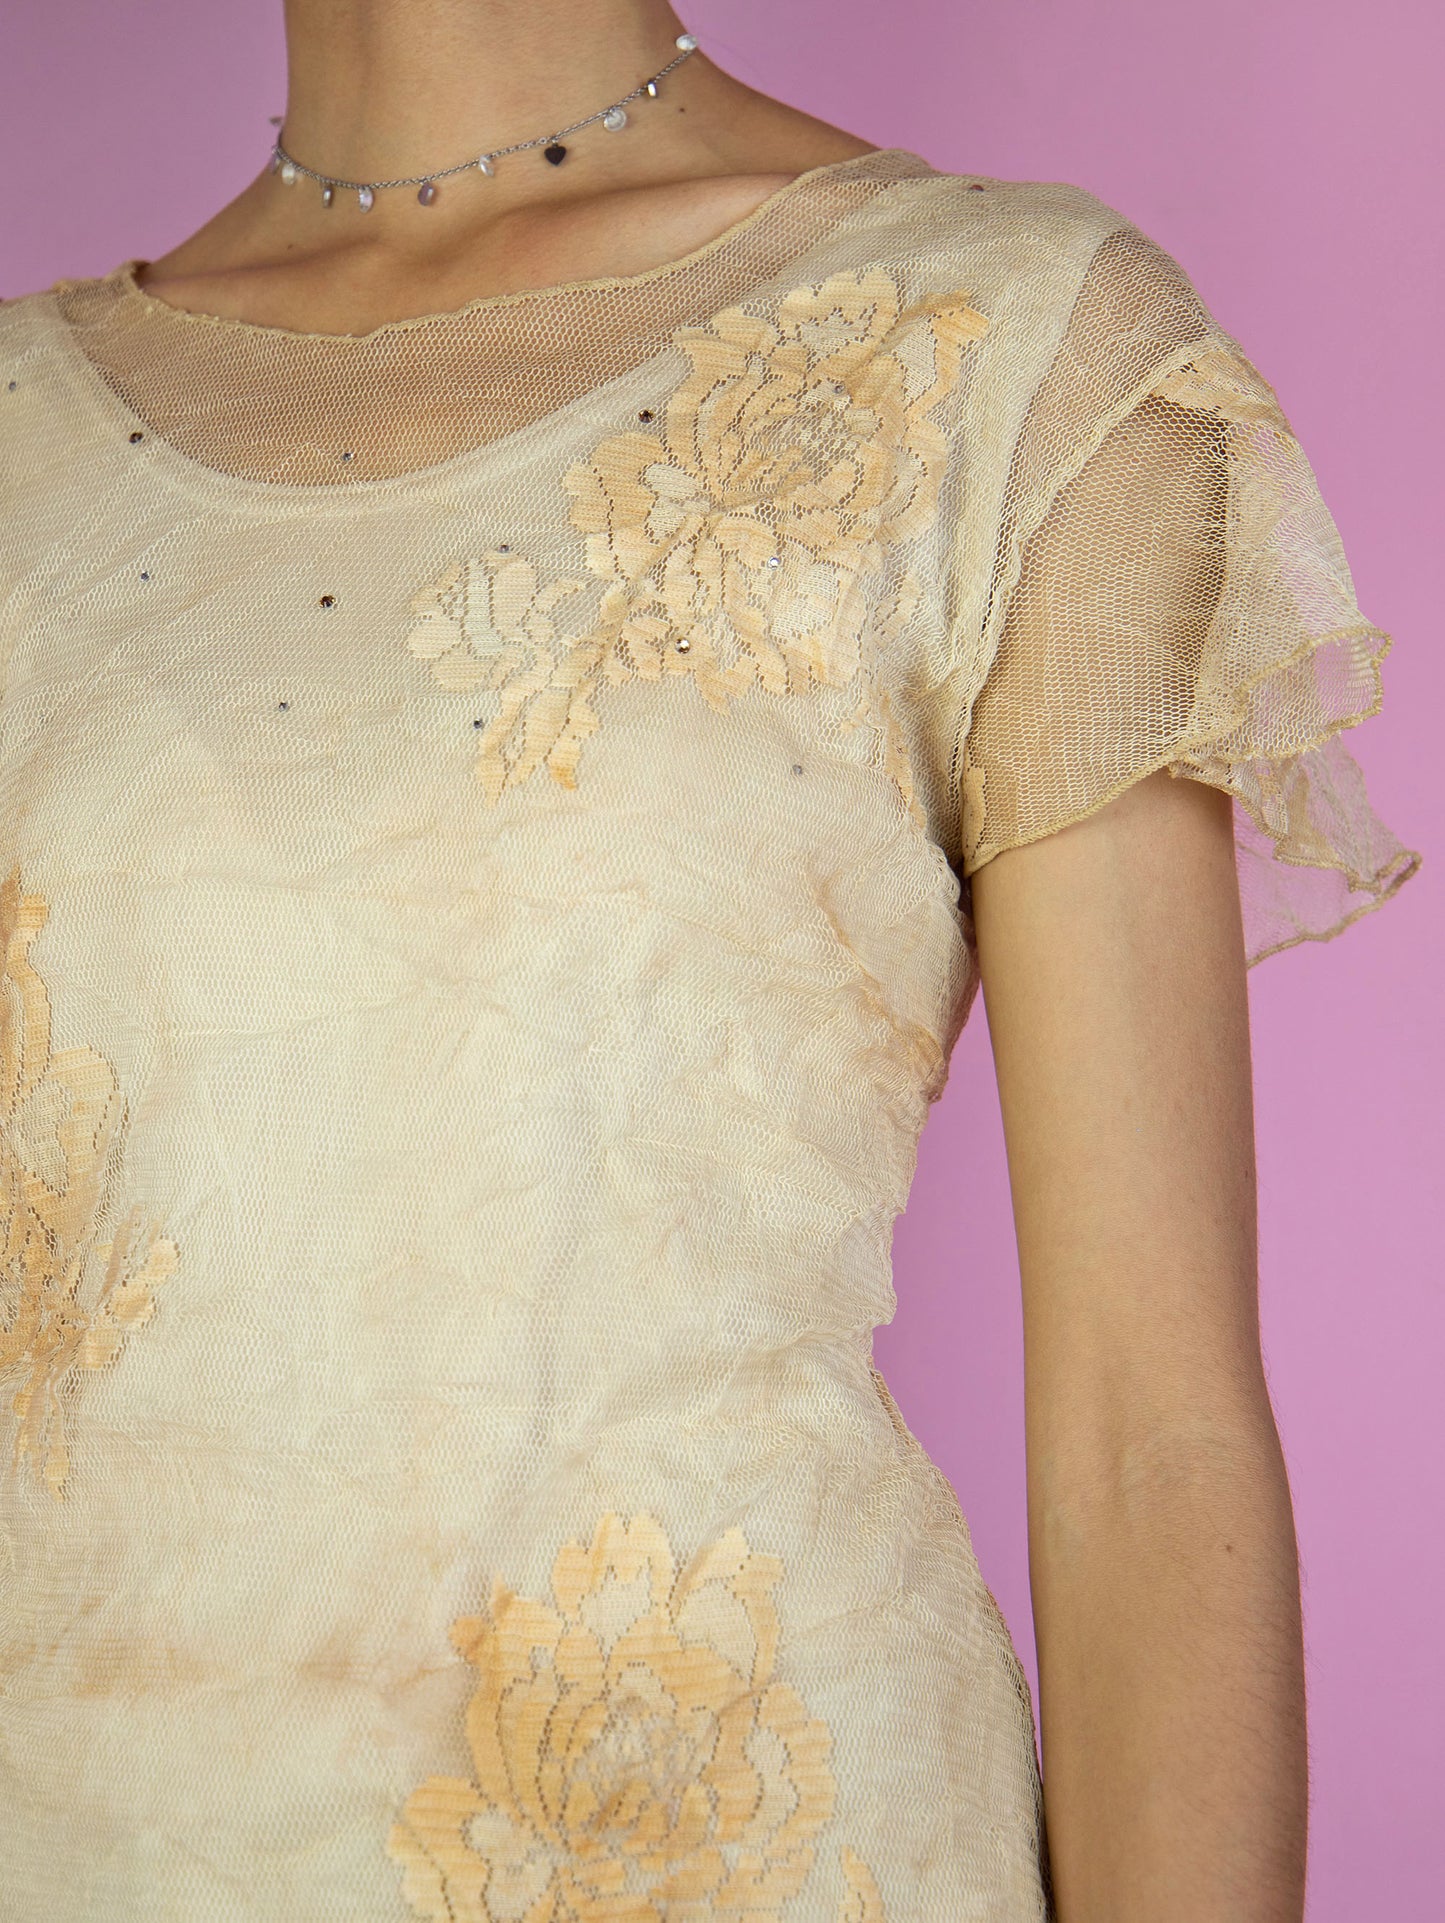 The Y2K Beige Mesh Sheer Top is a vintage short-sleeve, light brown semi-sheer mesh top adorned with delicate floral tulle and rhinestones. Romantic coquette 2000s fairy grunge shirt.